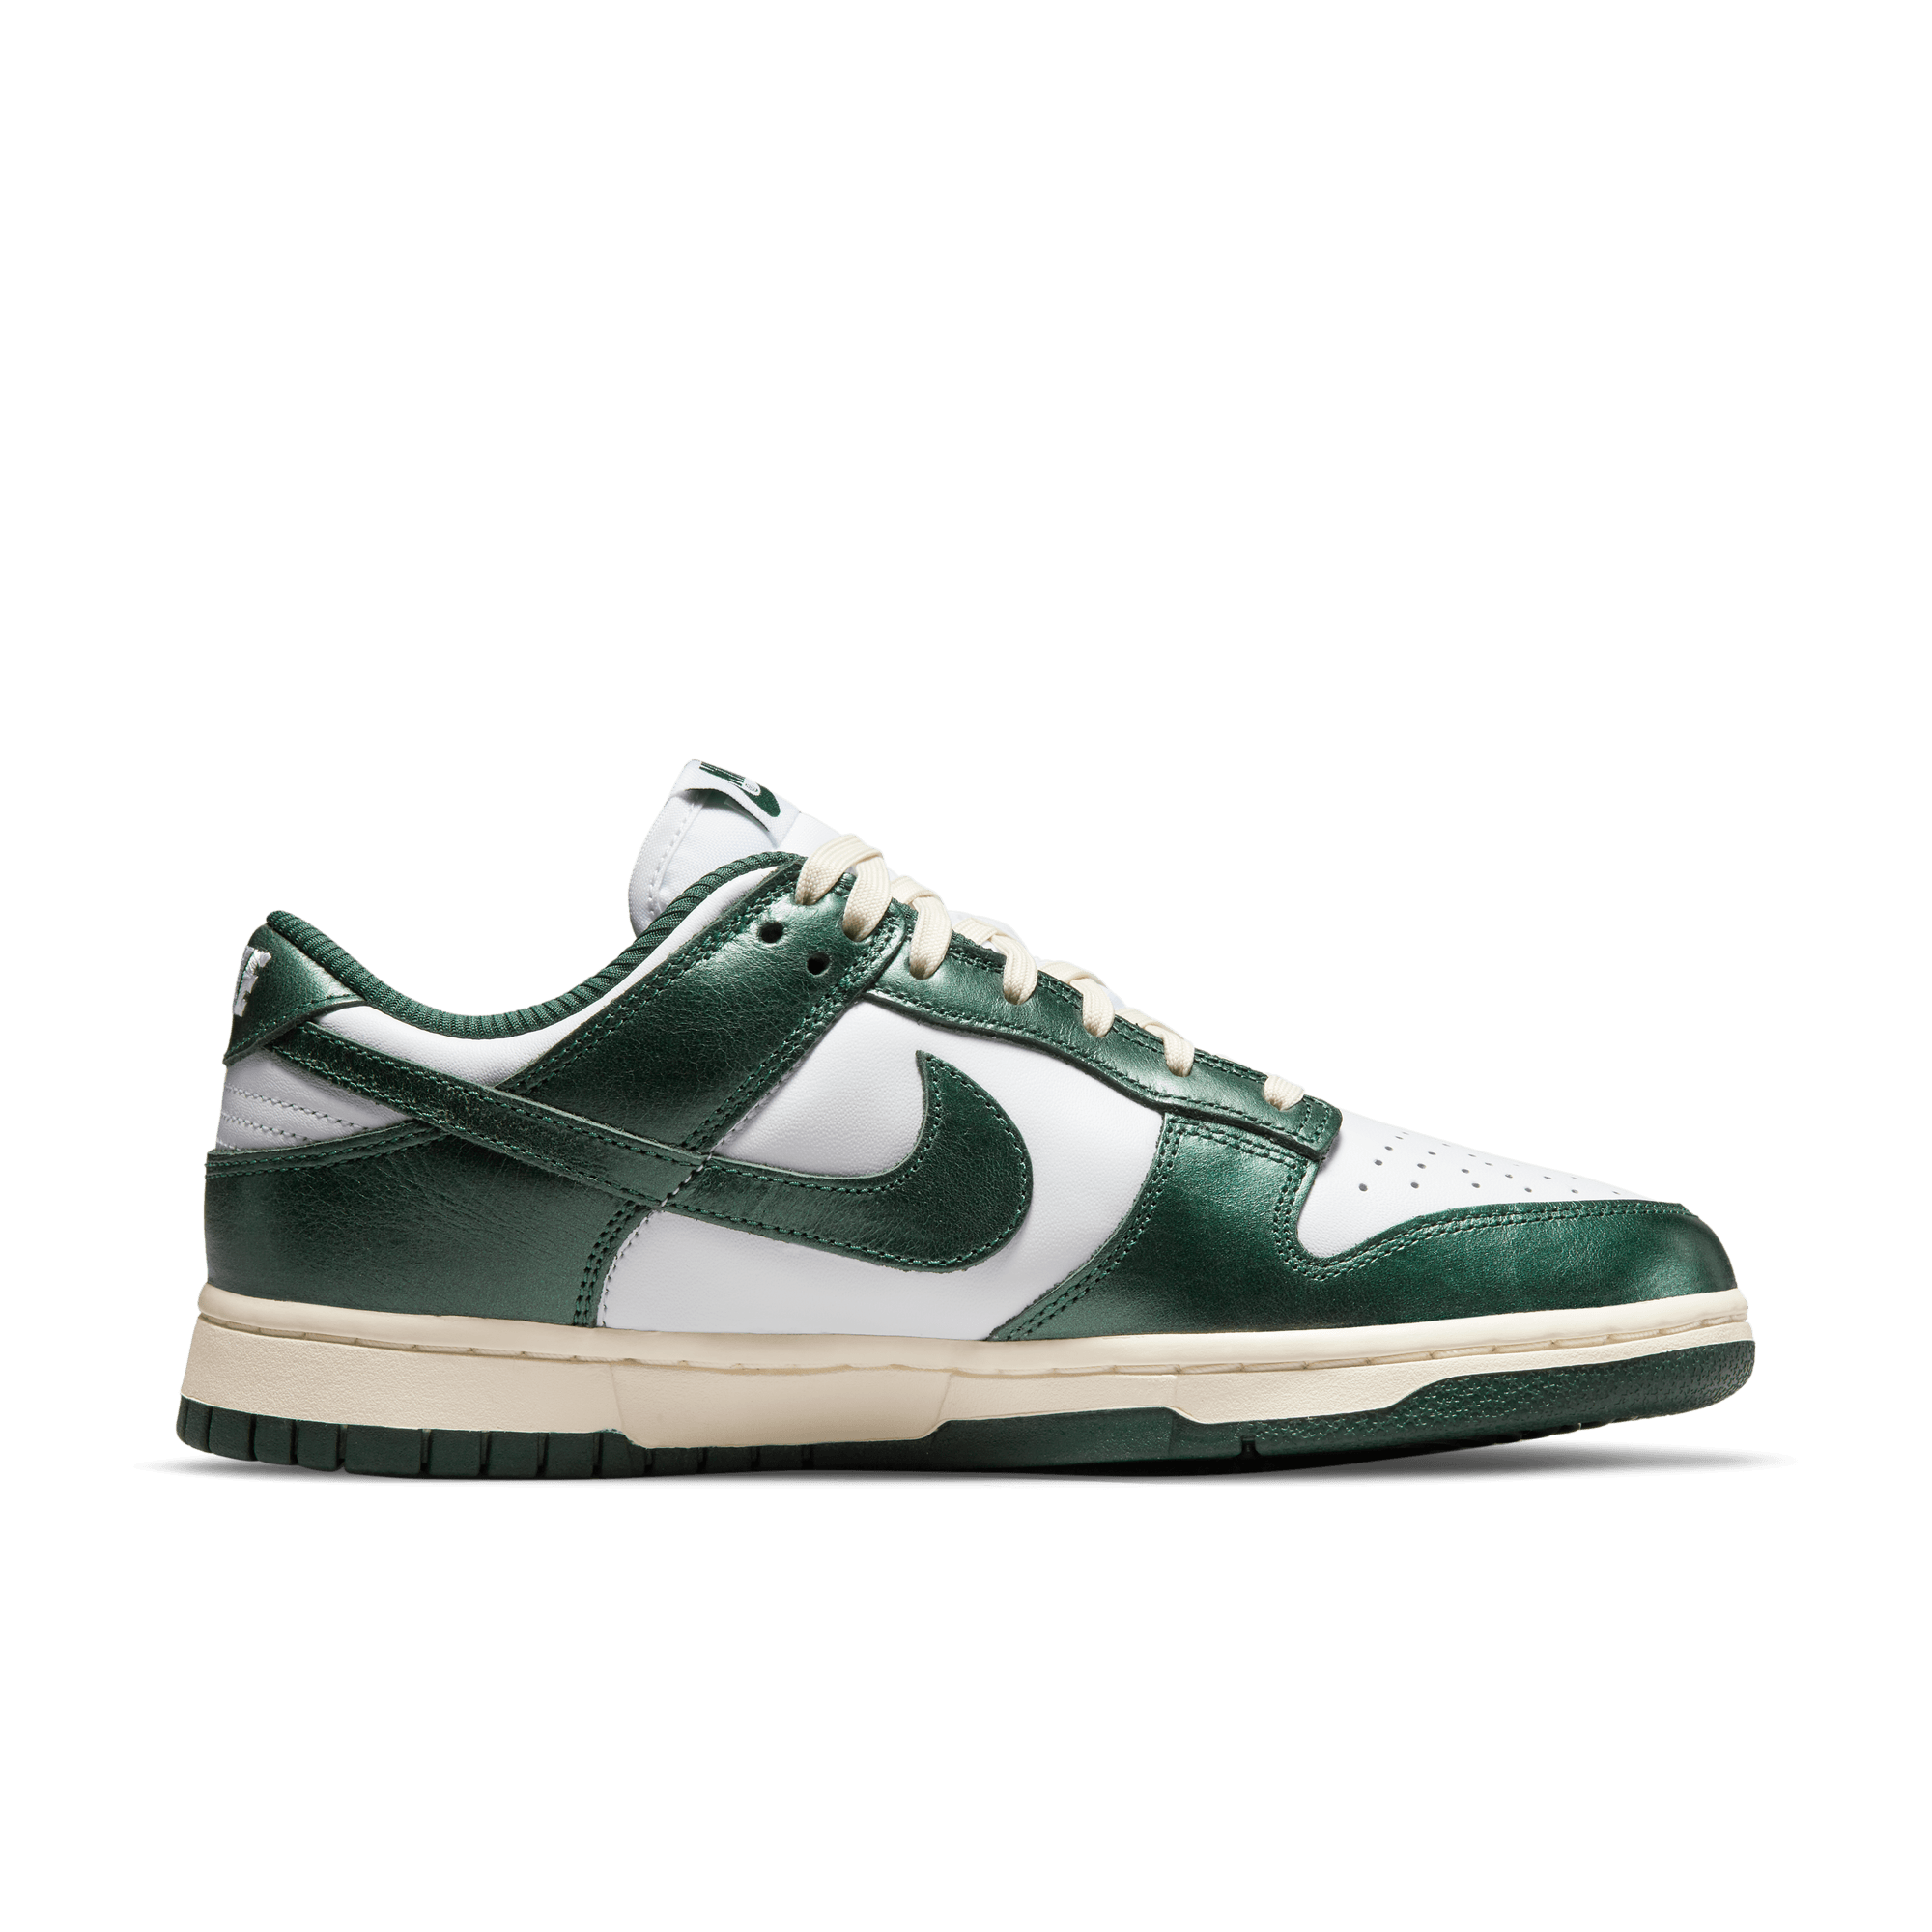 WMNS DUNK LOW "VINTAGE GREEN"